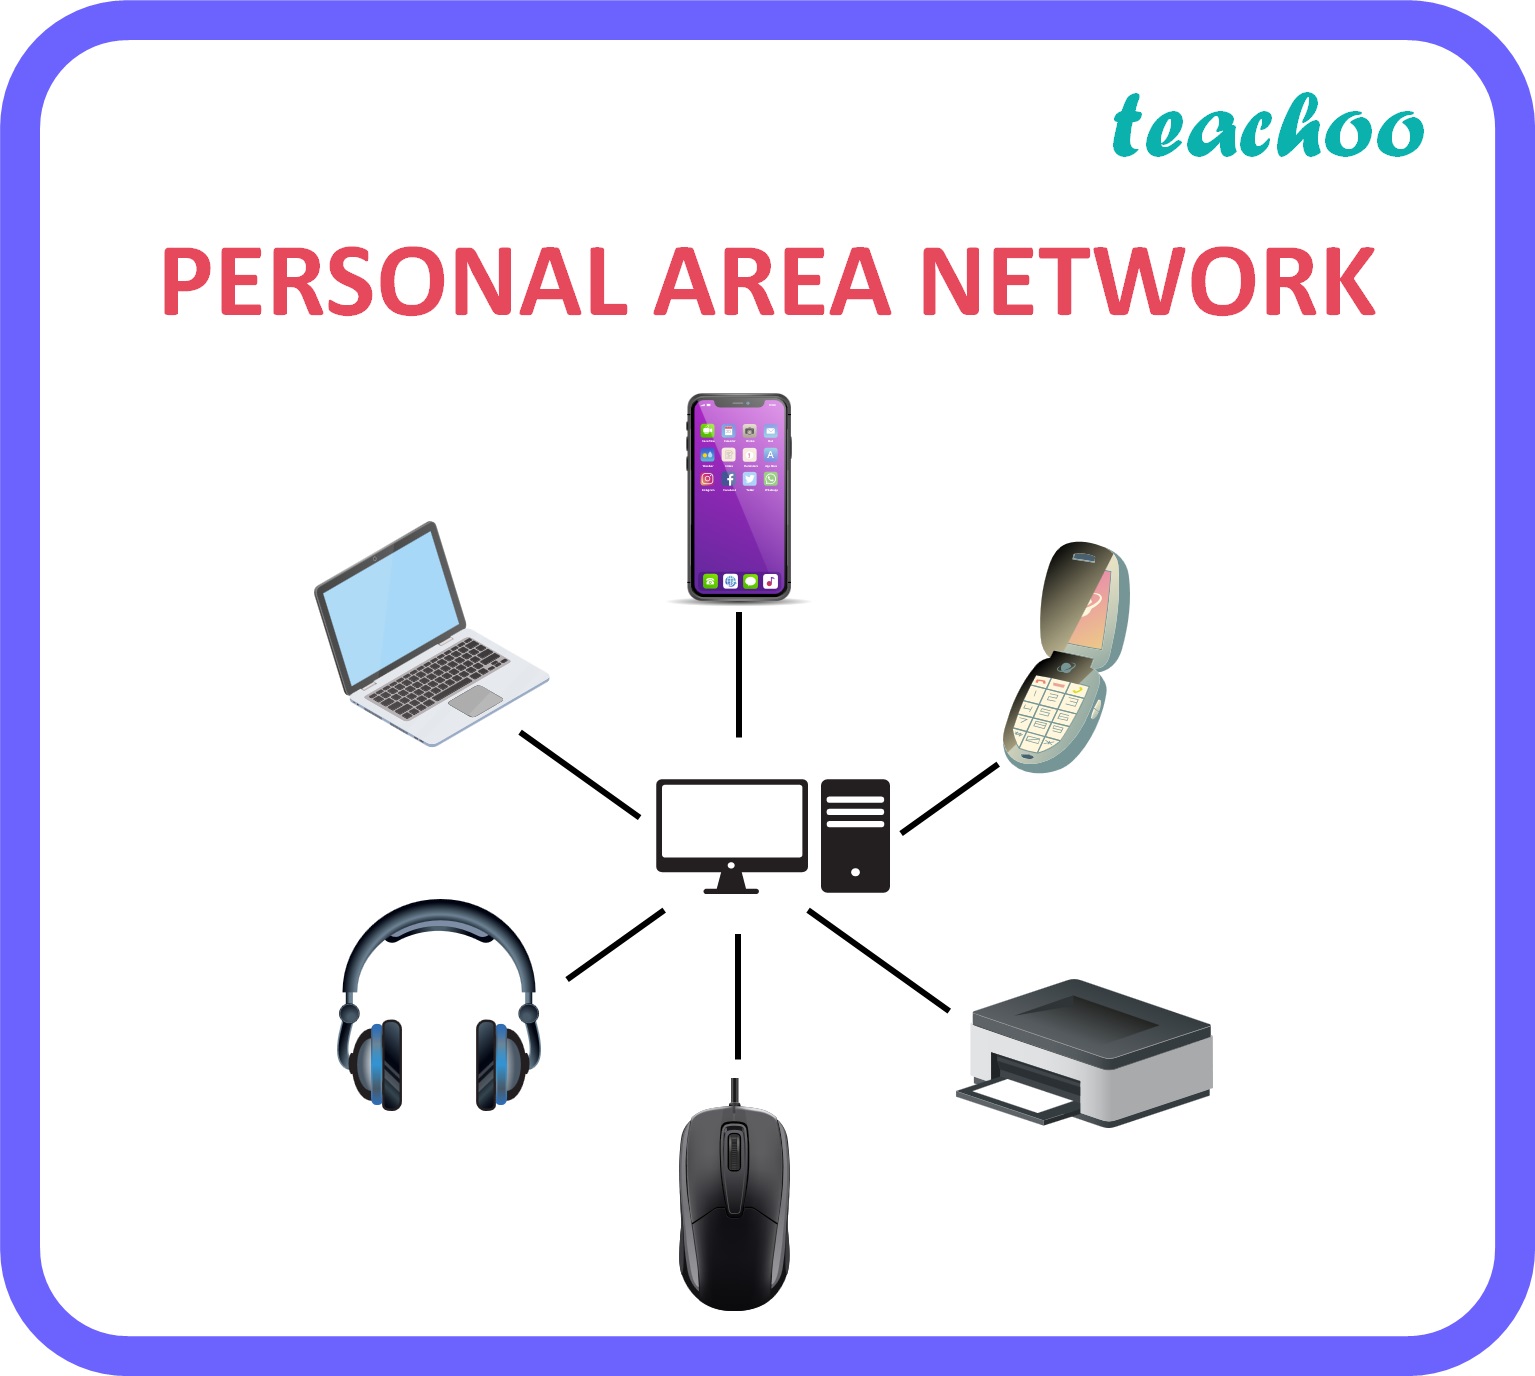 Personal area network